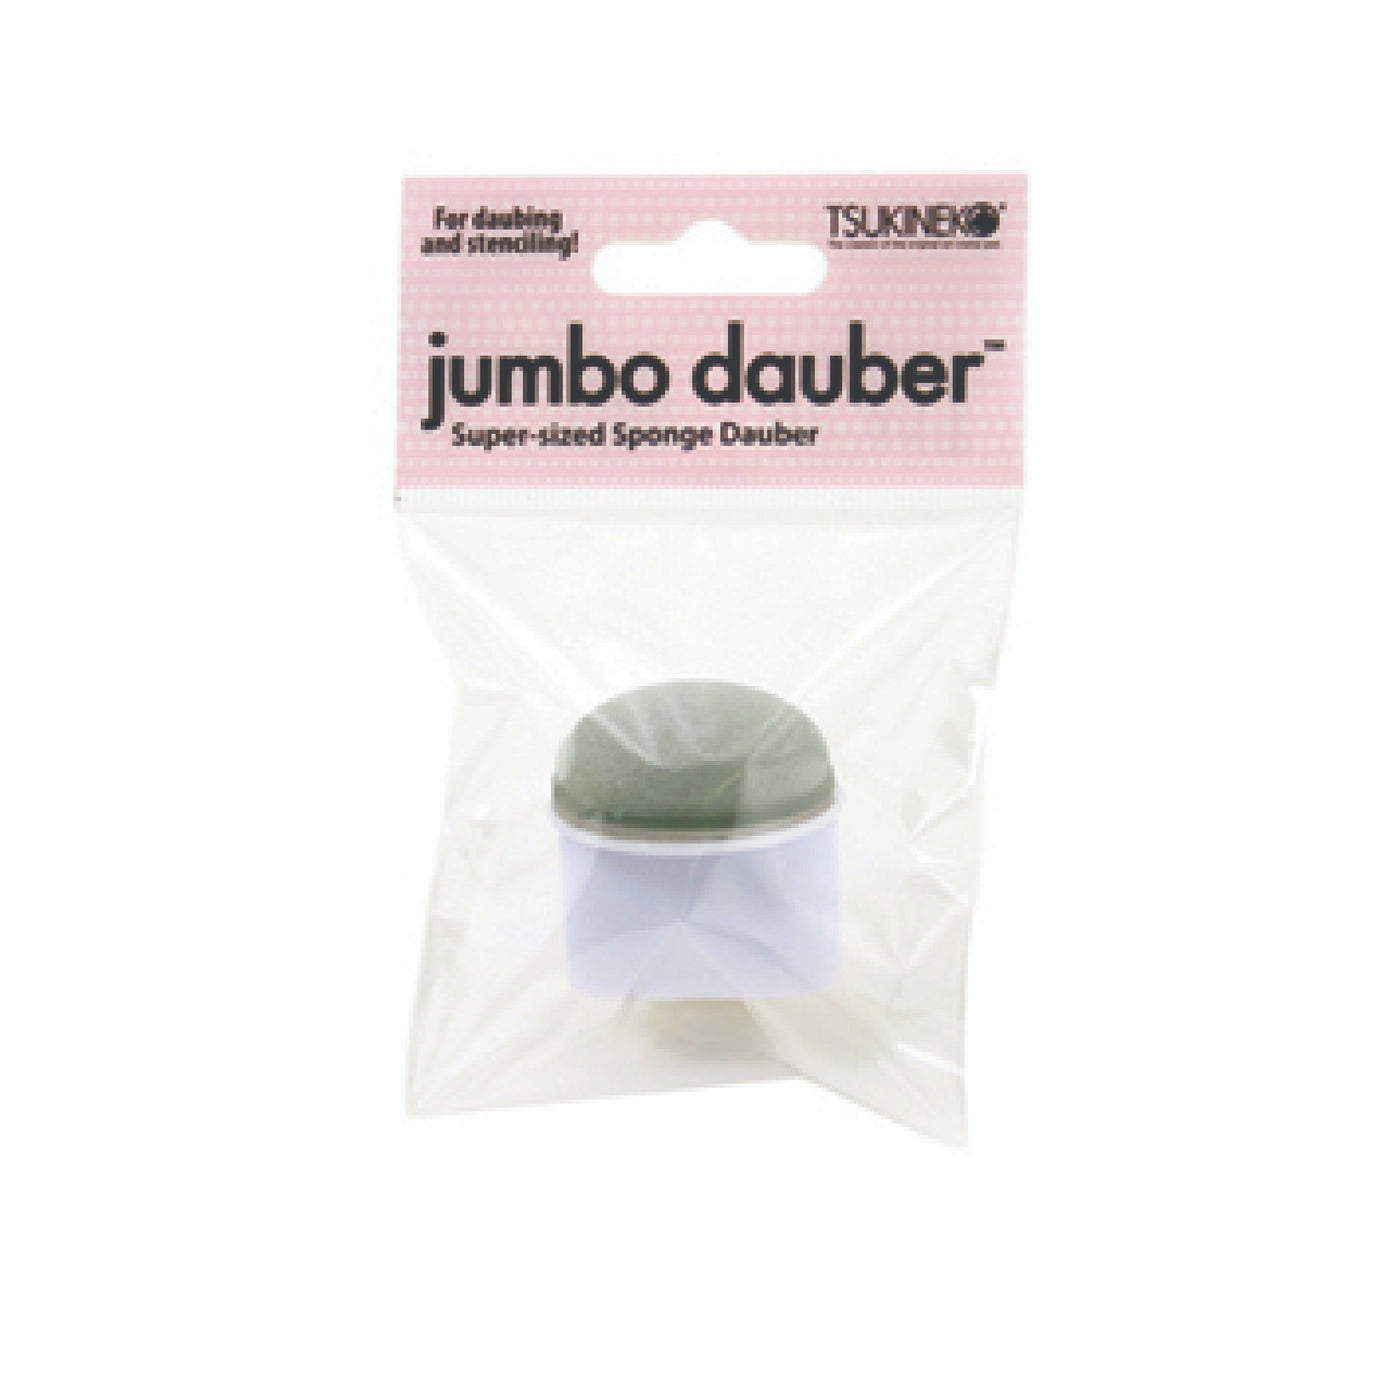 At over twice the size of Tsukineko's sponge dauber, jumbo daubers offer faster coverage and the ability to create a more diffused effect; Wonderful for landscaping and soft backgrounds in paper crafting